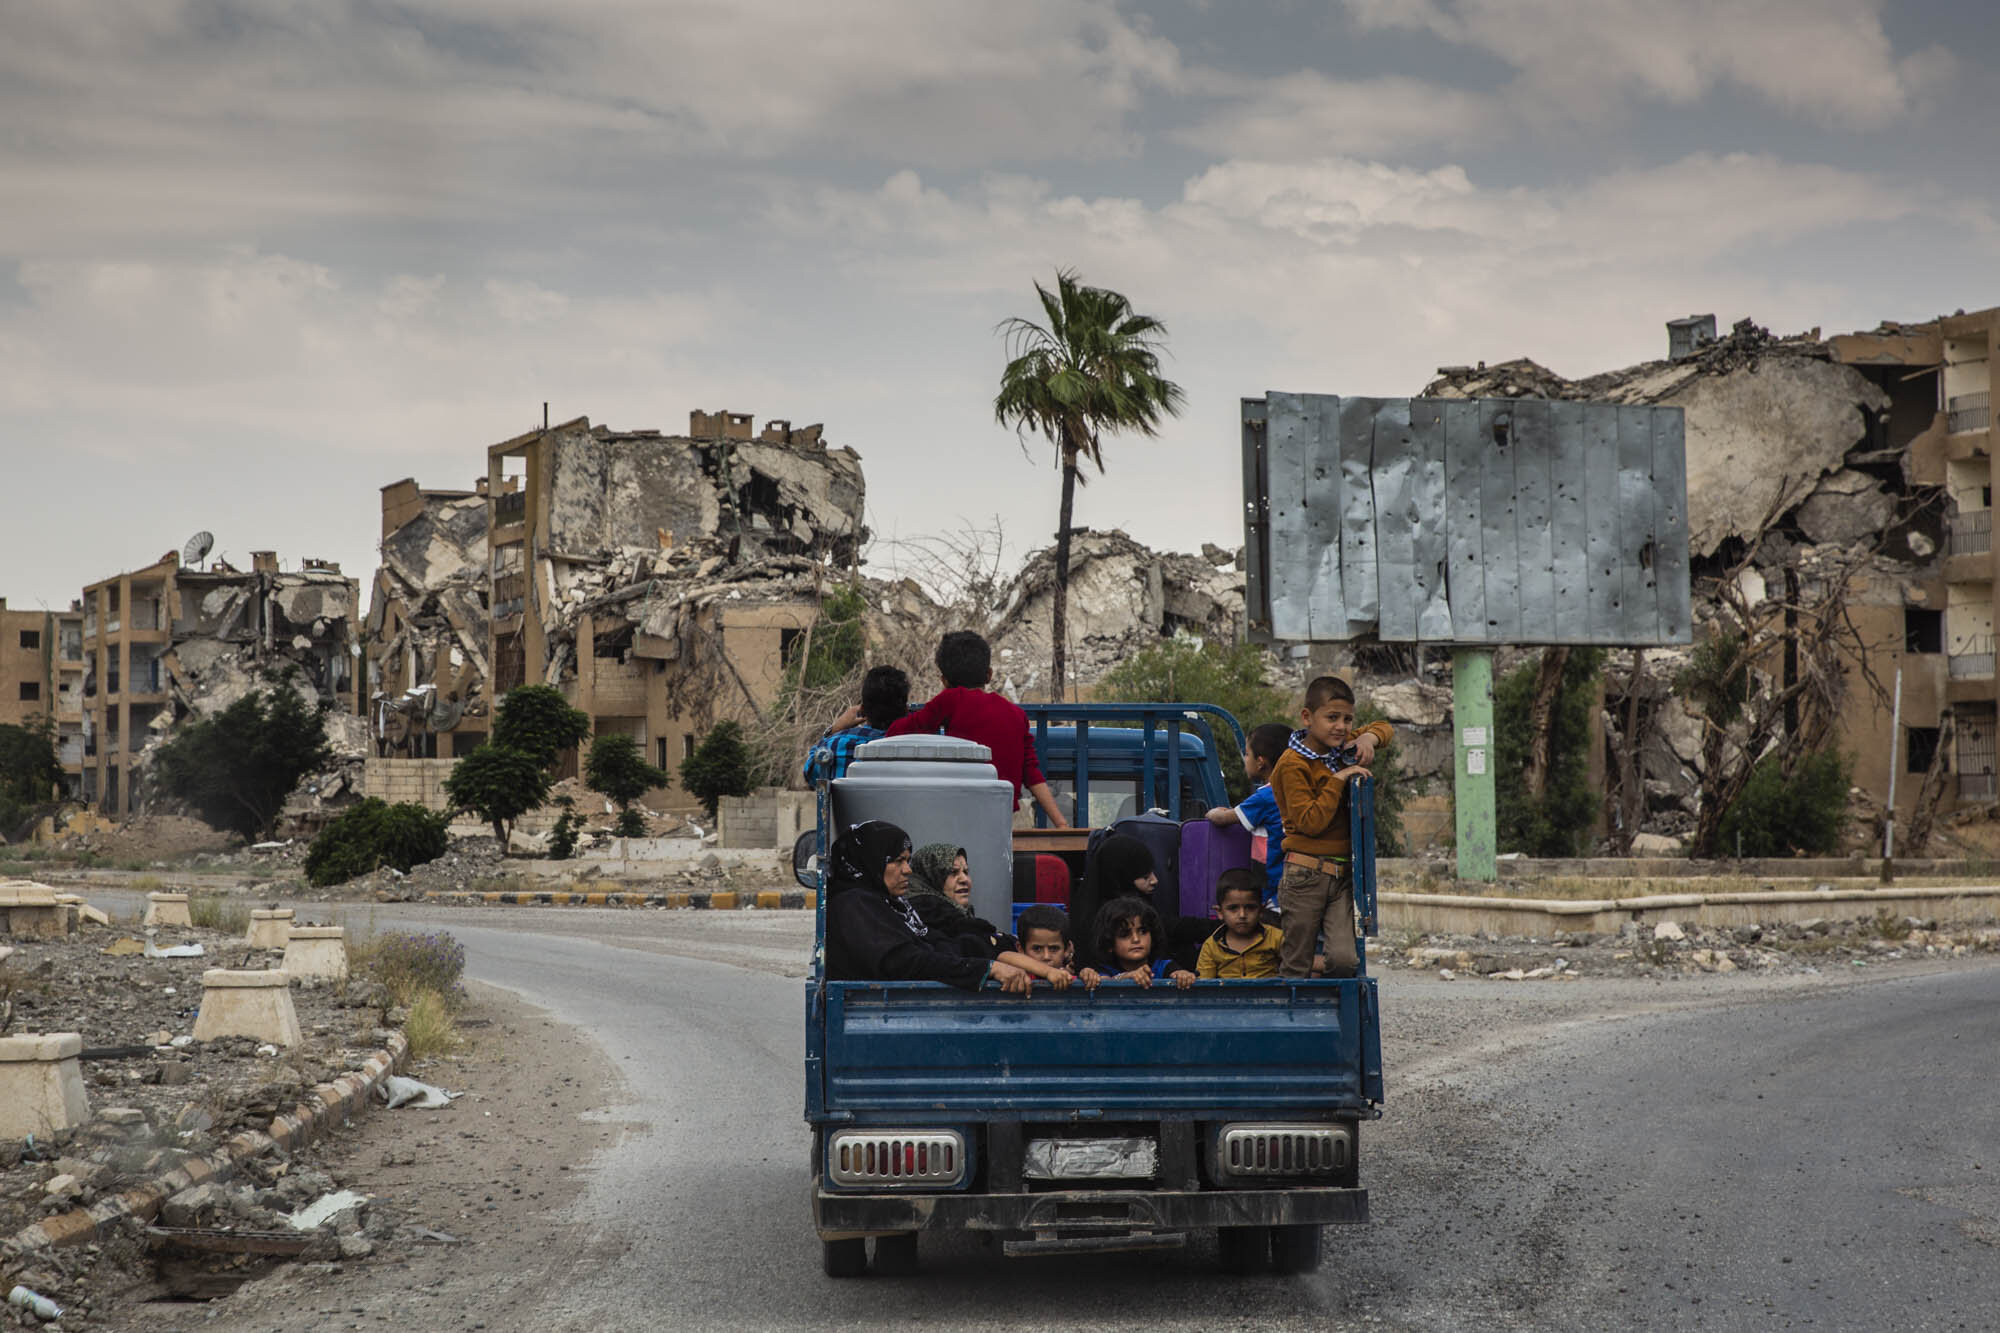  Eissa al-Ali and his family returned home to their heavily destroyed neighbourhood in Raqqa after years of being displaced. The battle to liberate the city from ISIS destroyed 80% of building and likely killed thousands of civilians. Syria - June 20